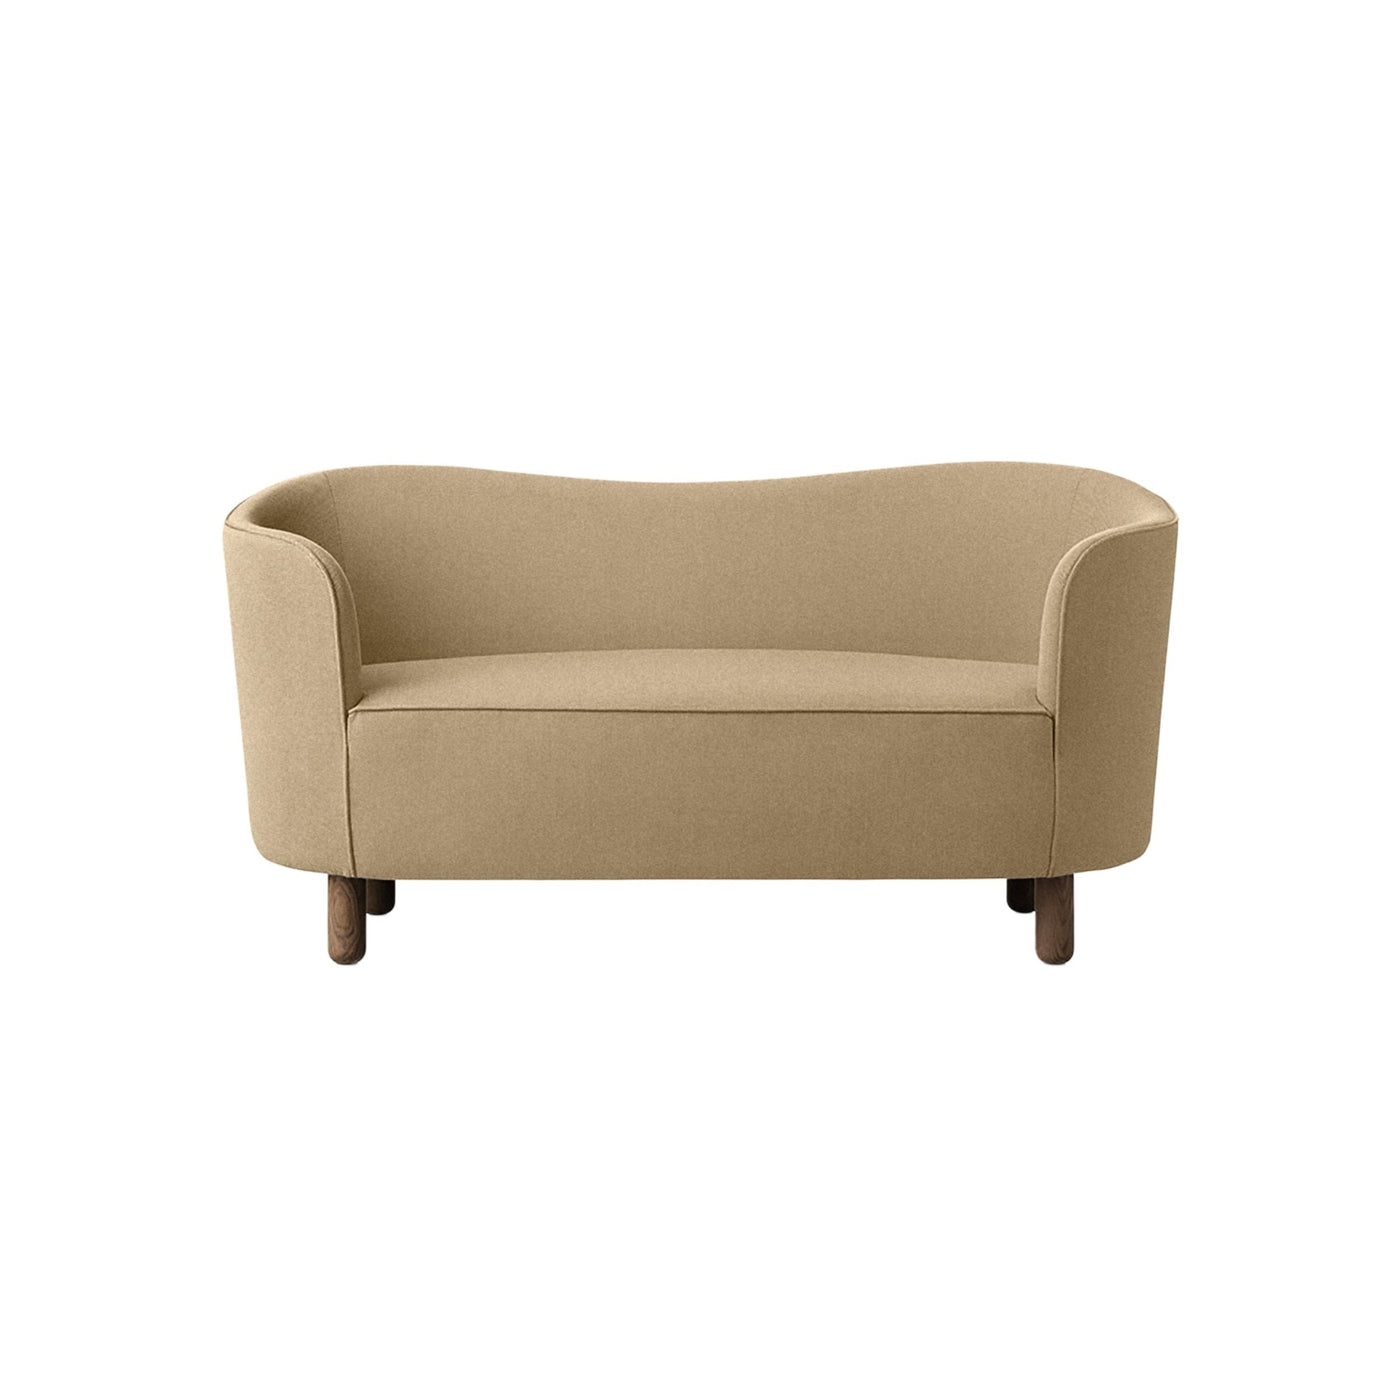 By Lassen Mingle sofa with smoked oak legs. Made to order from someday designs. #colour_vidar-323